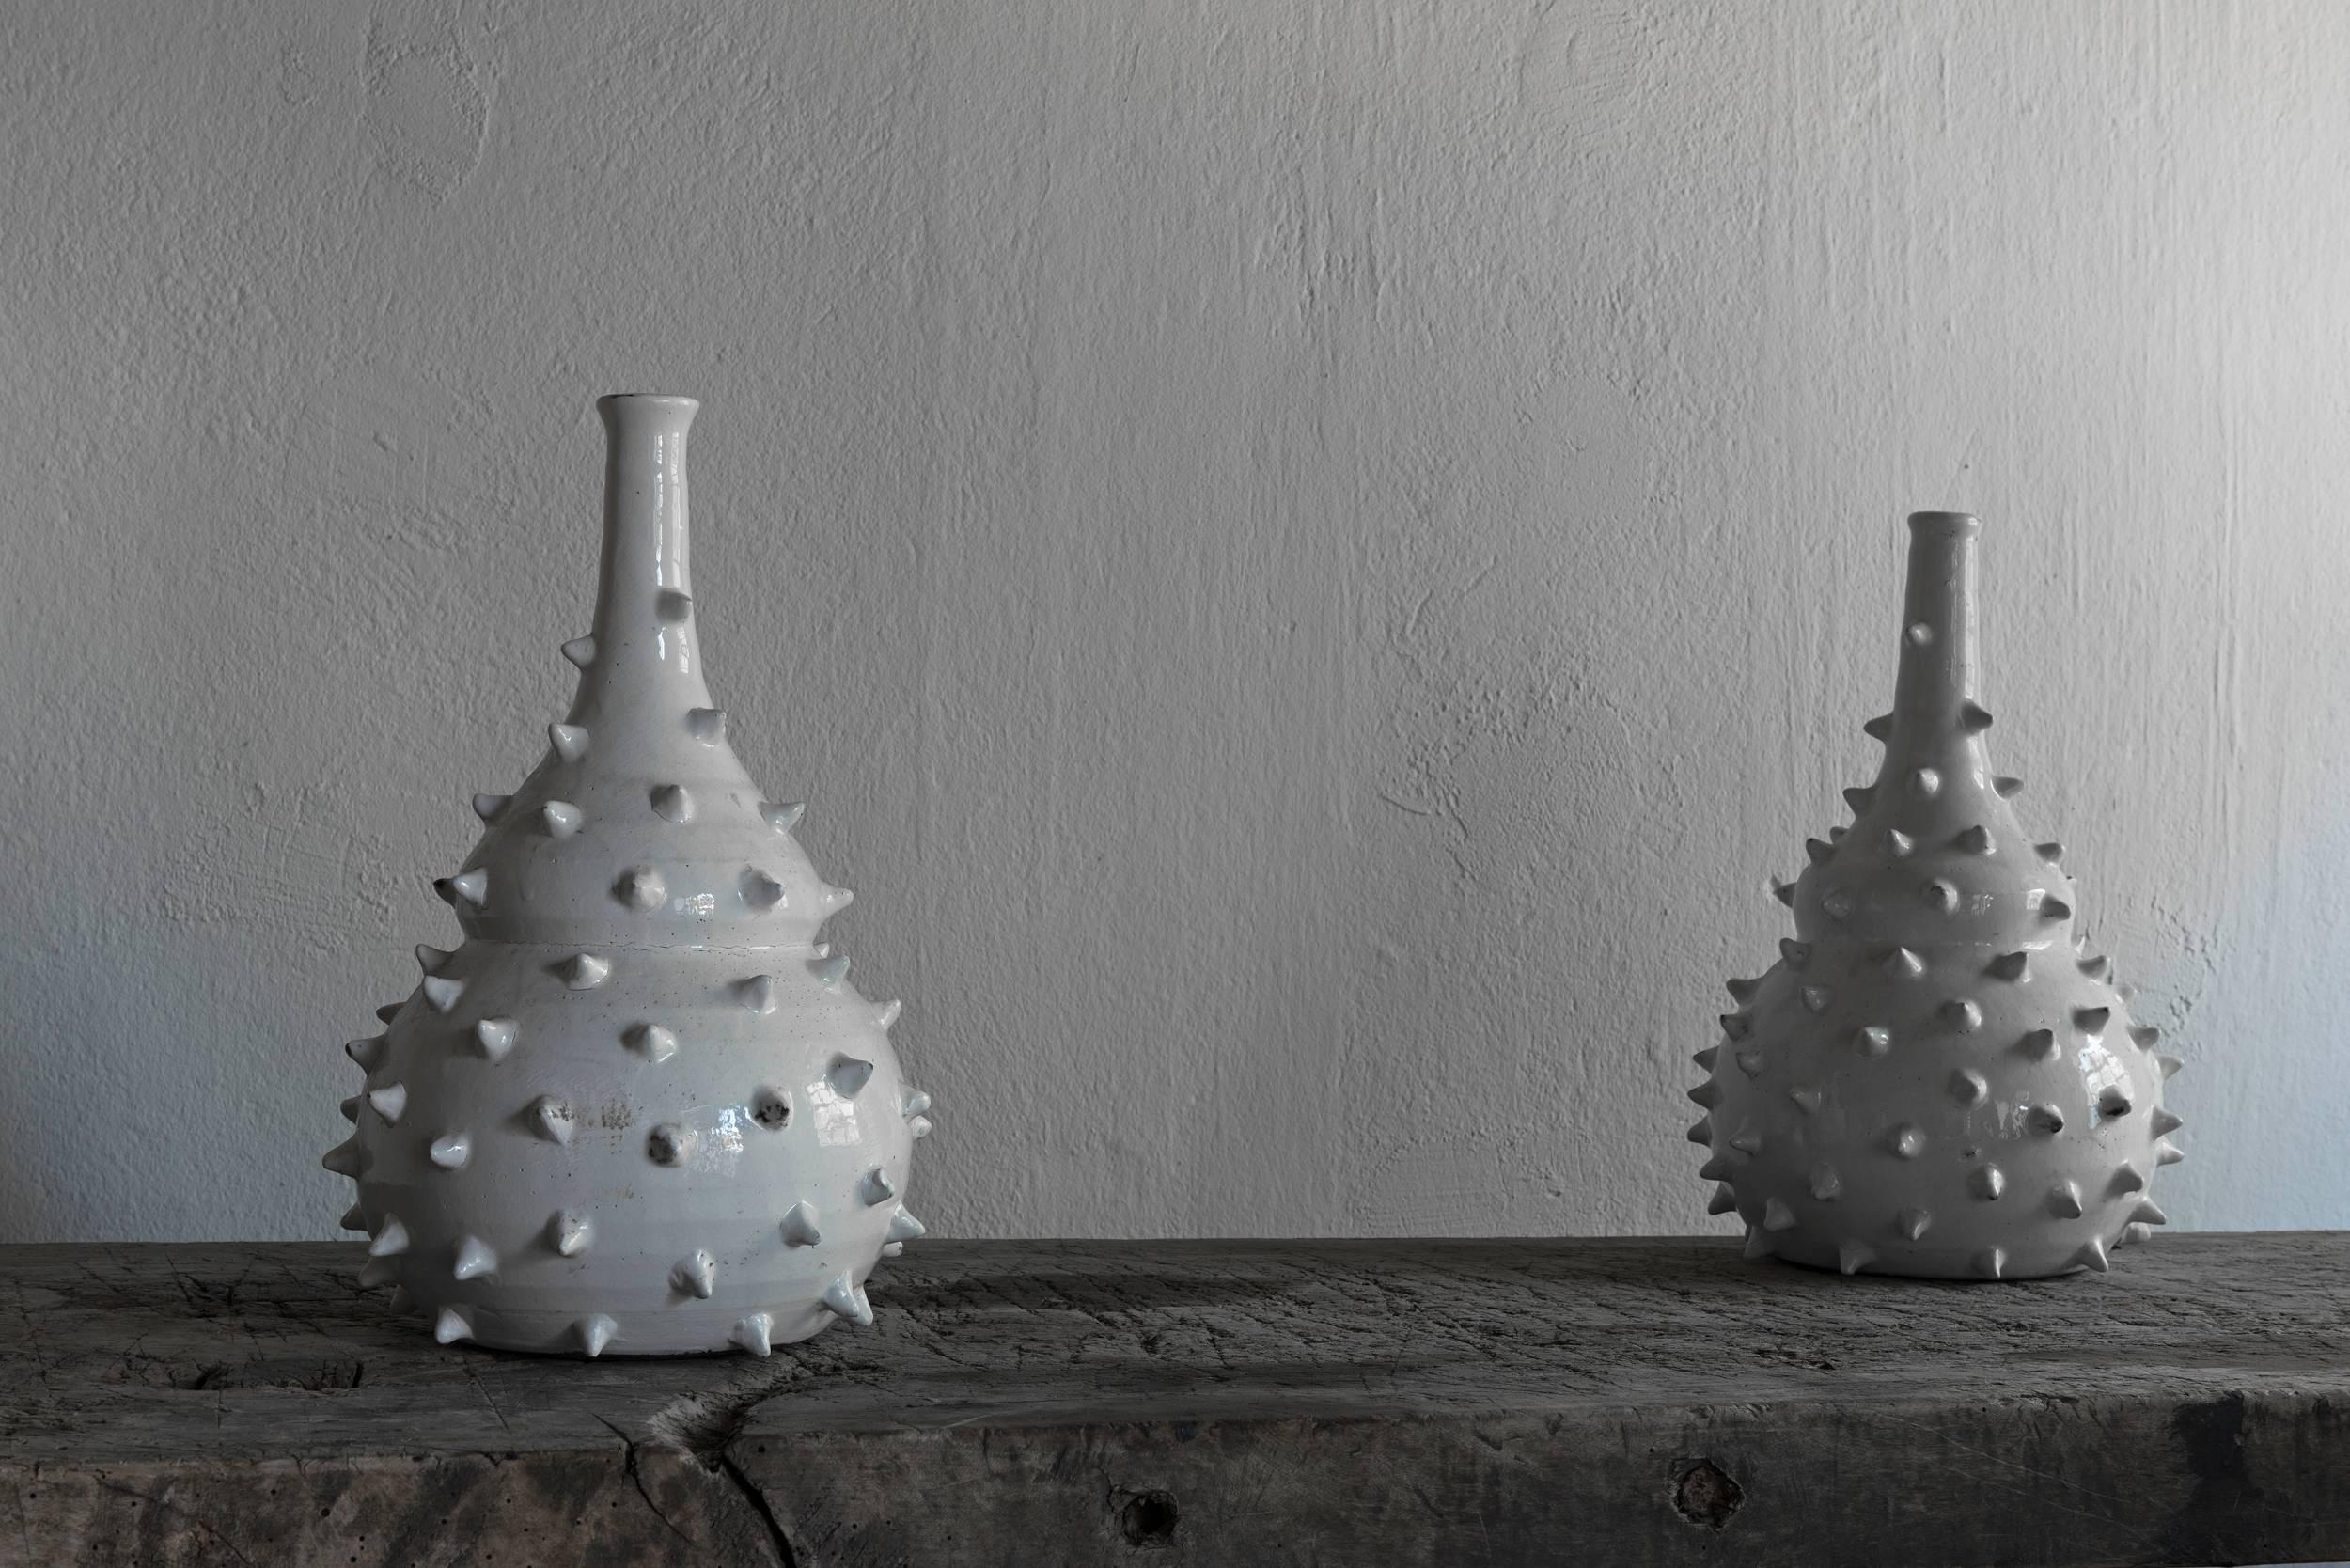 Unusual pair of spiked ceramic vases, France, 1960s.